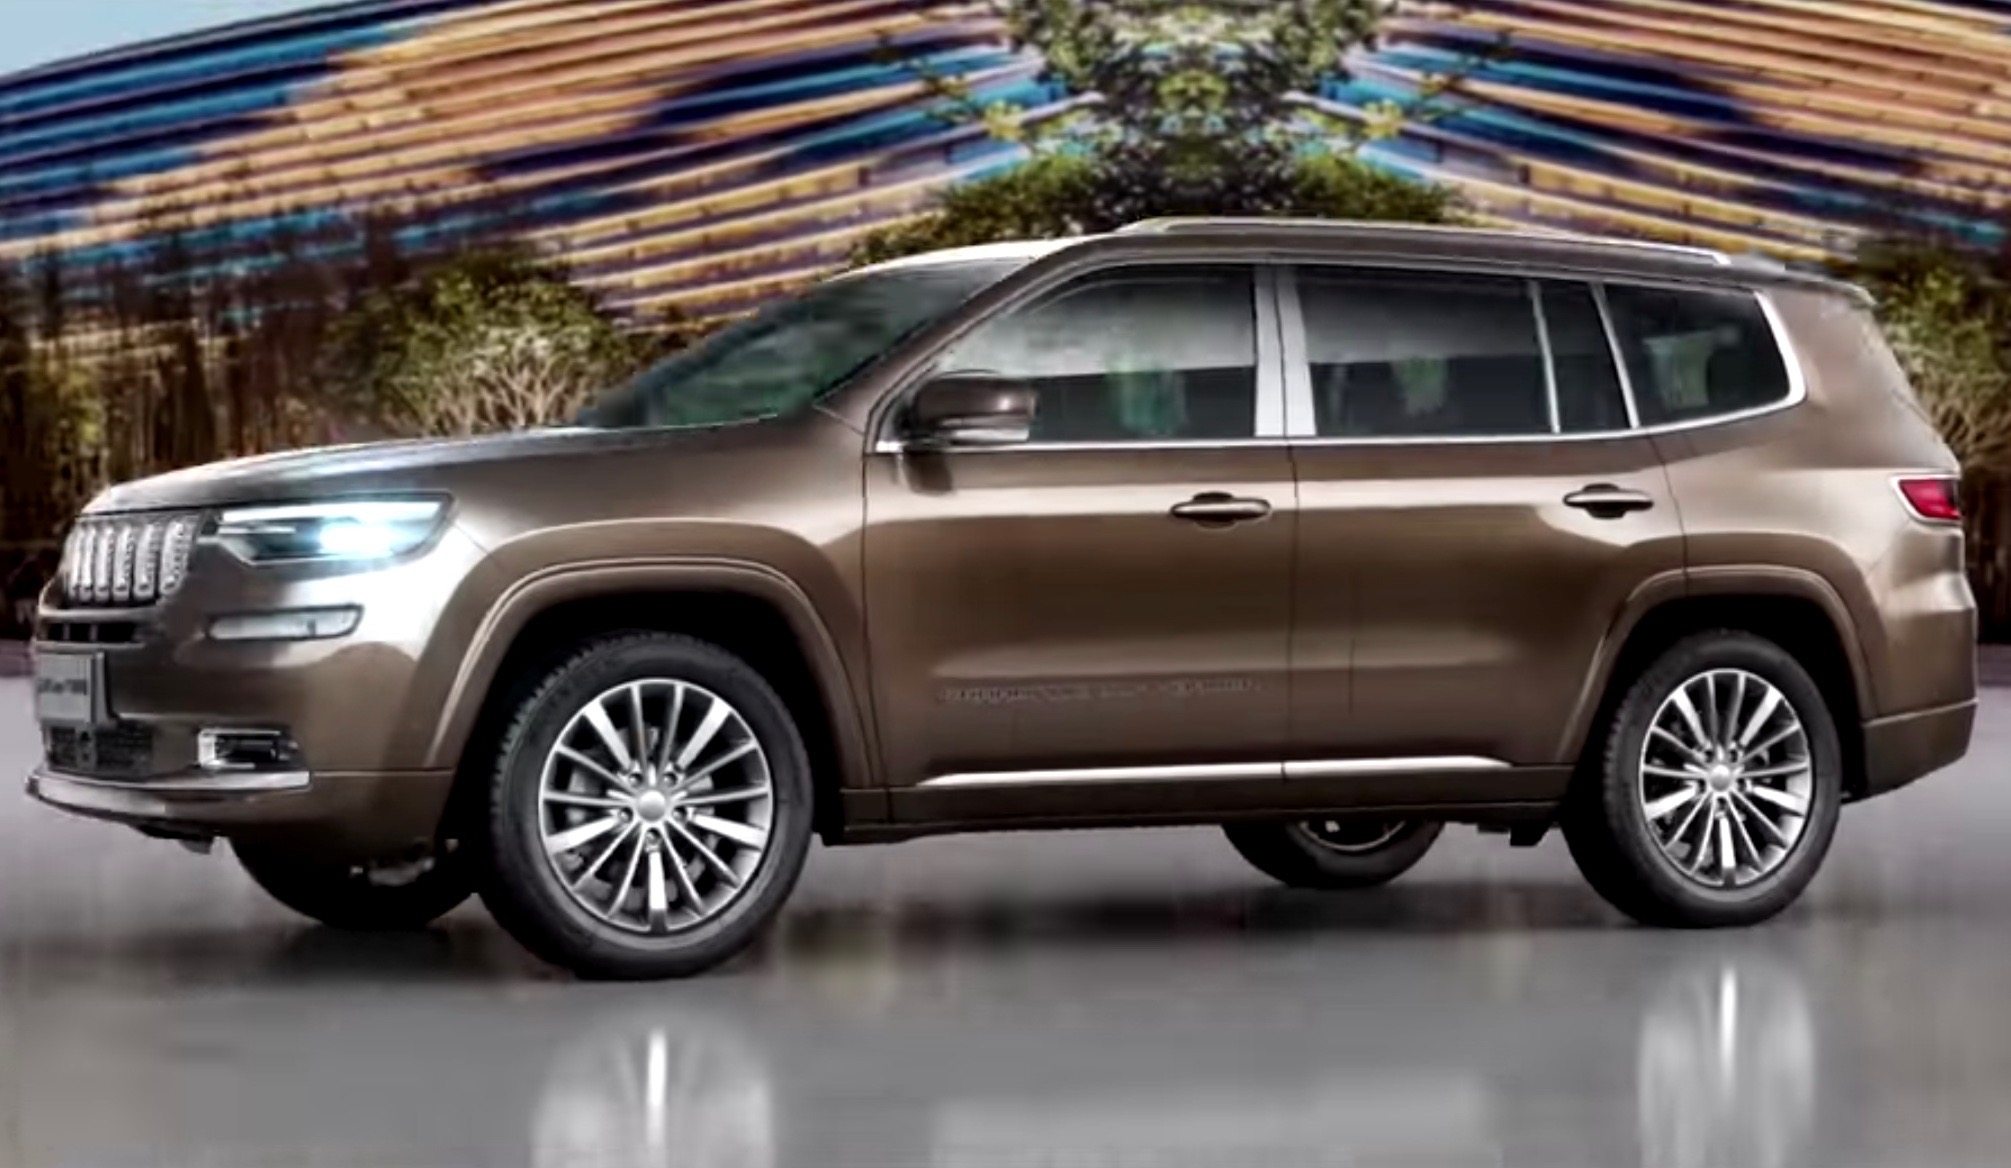 Jeep Grand Commander revealed as new 7-seat SUV for China